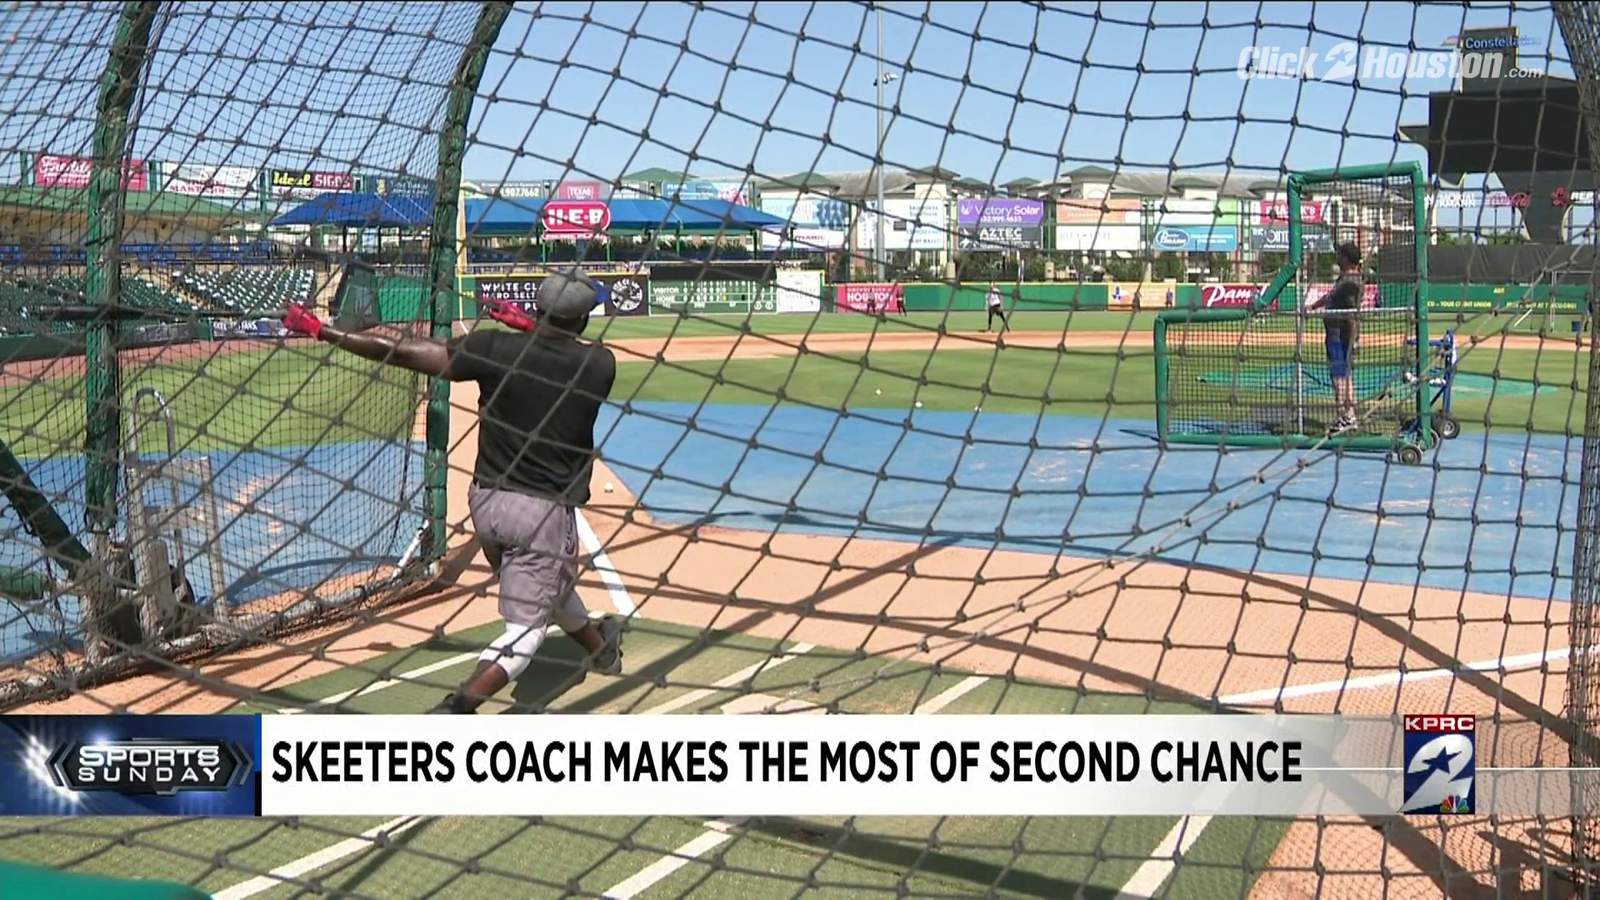 Pro baseball players say this coach has a unique skill. He chalks it up to an accident nearly 3 decades ago